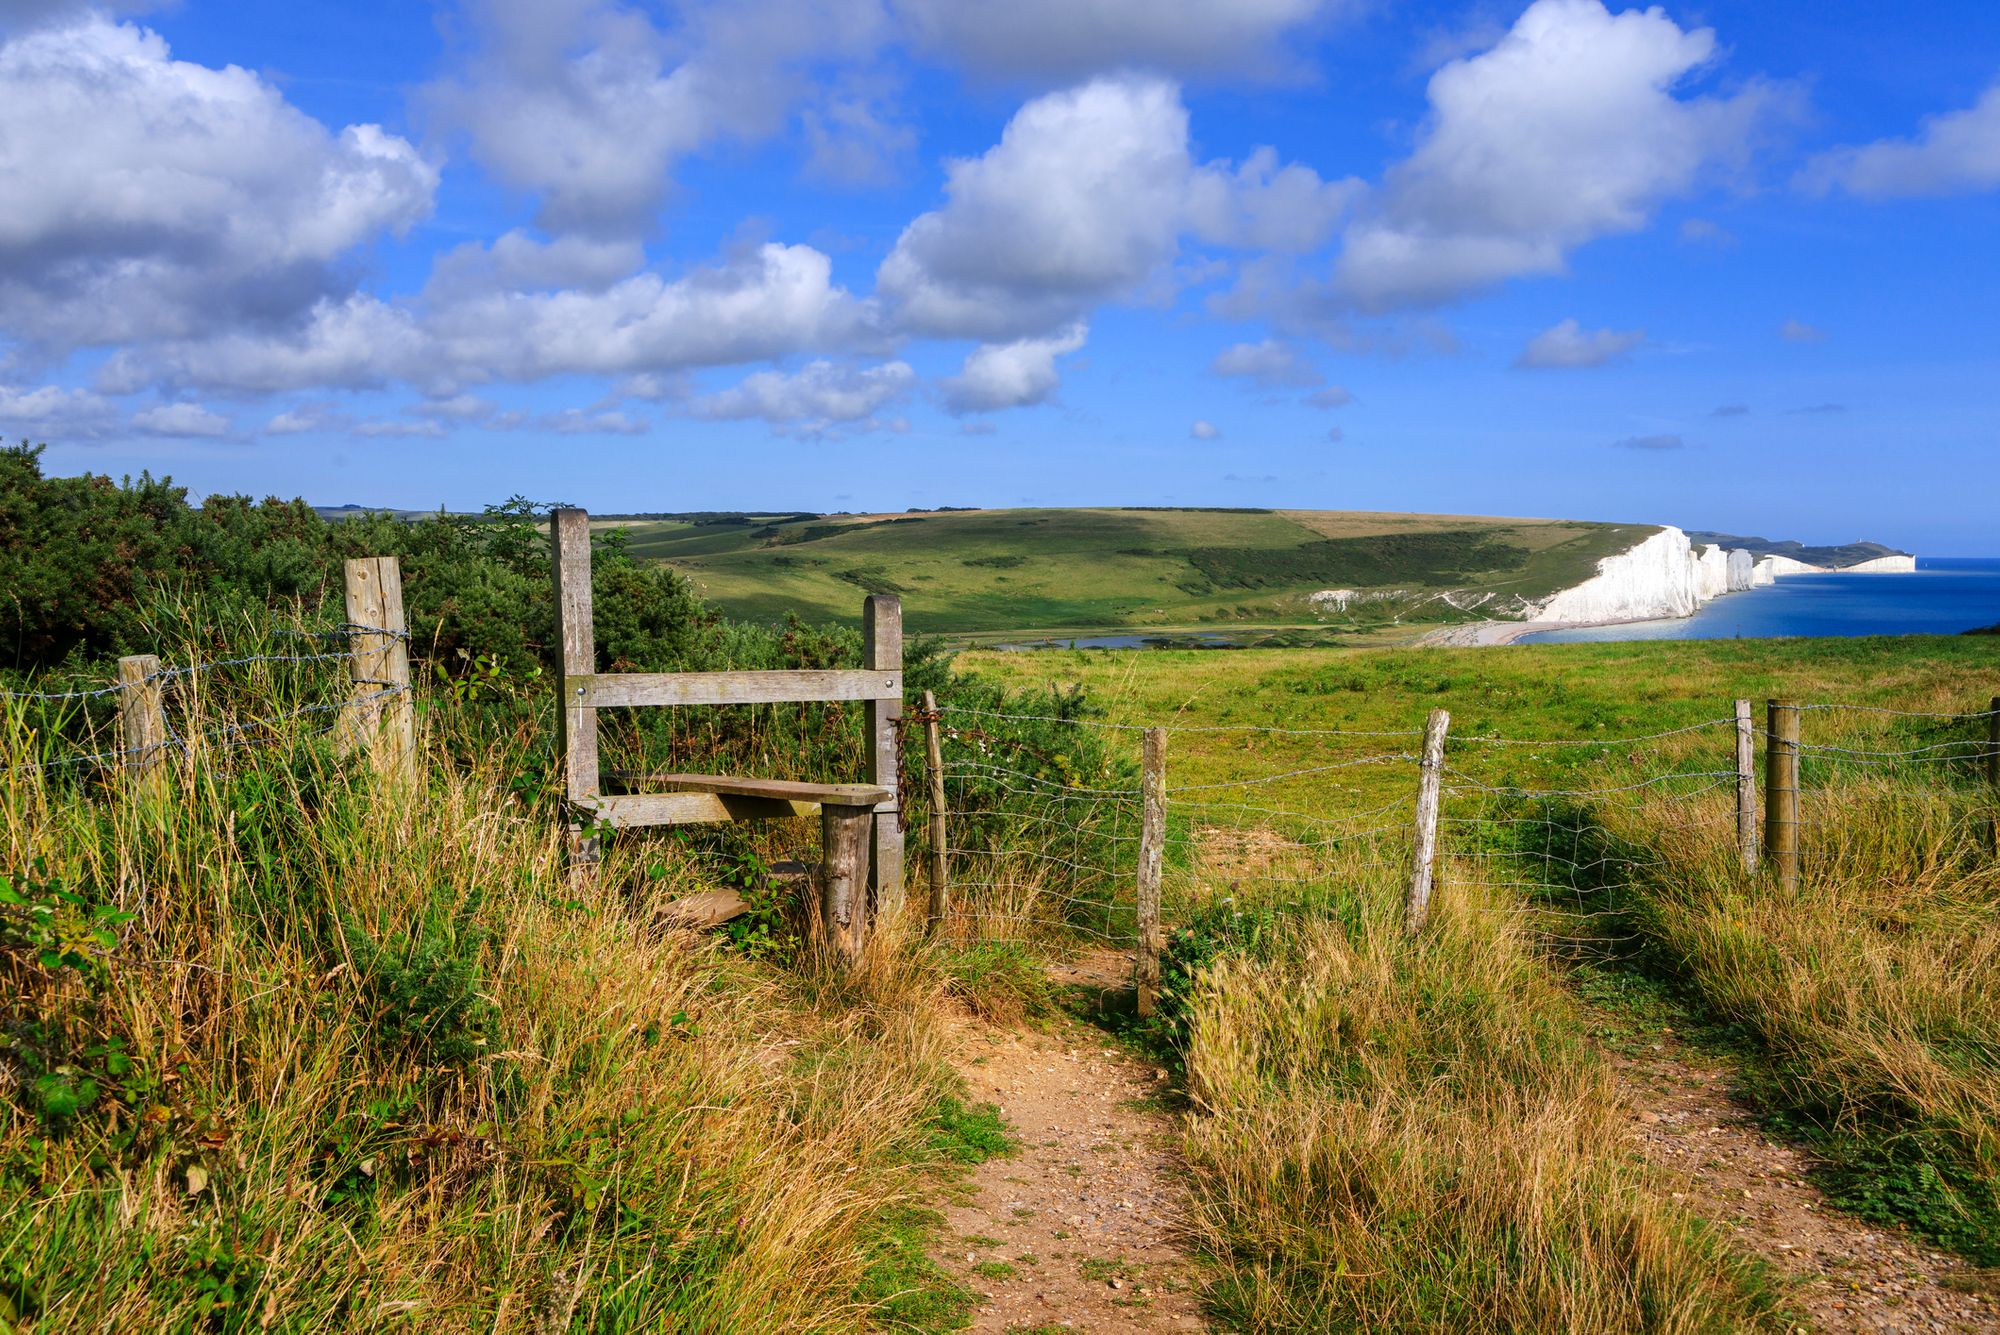 South Downs Way - best hikes UK